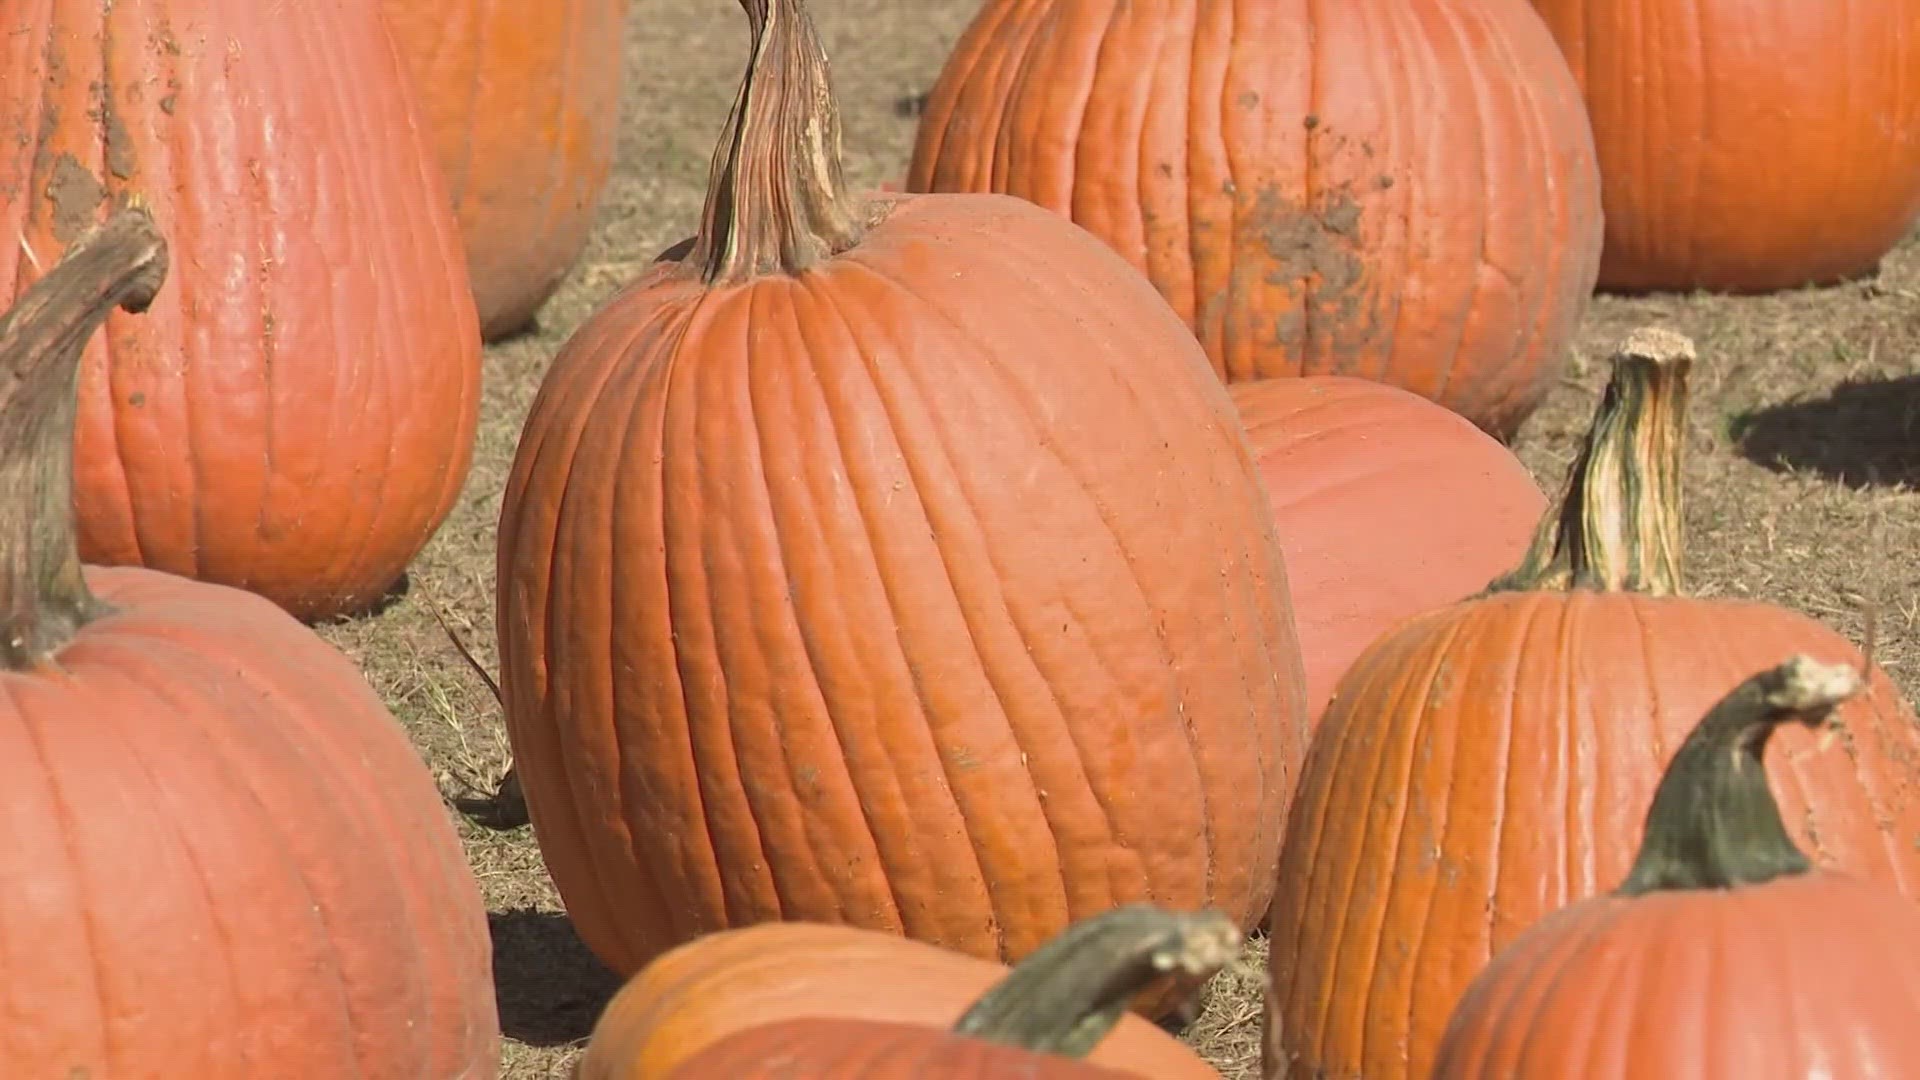 Farmers say the drought has impacted the number of pumpkins they've been able to grow.